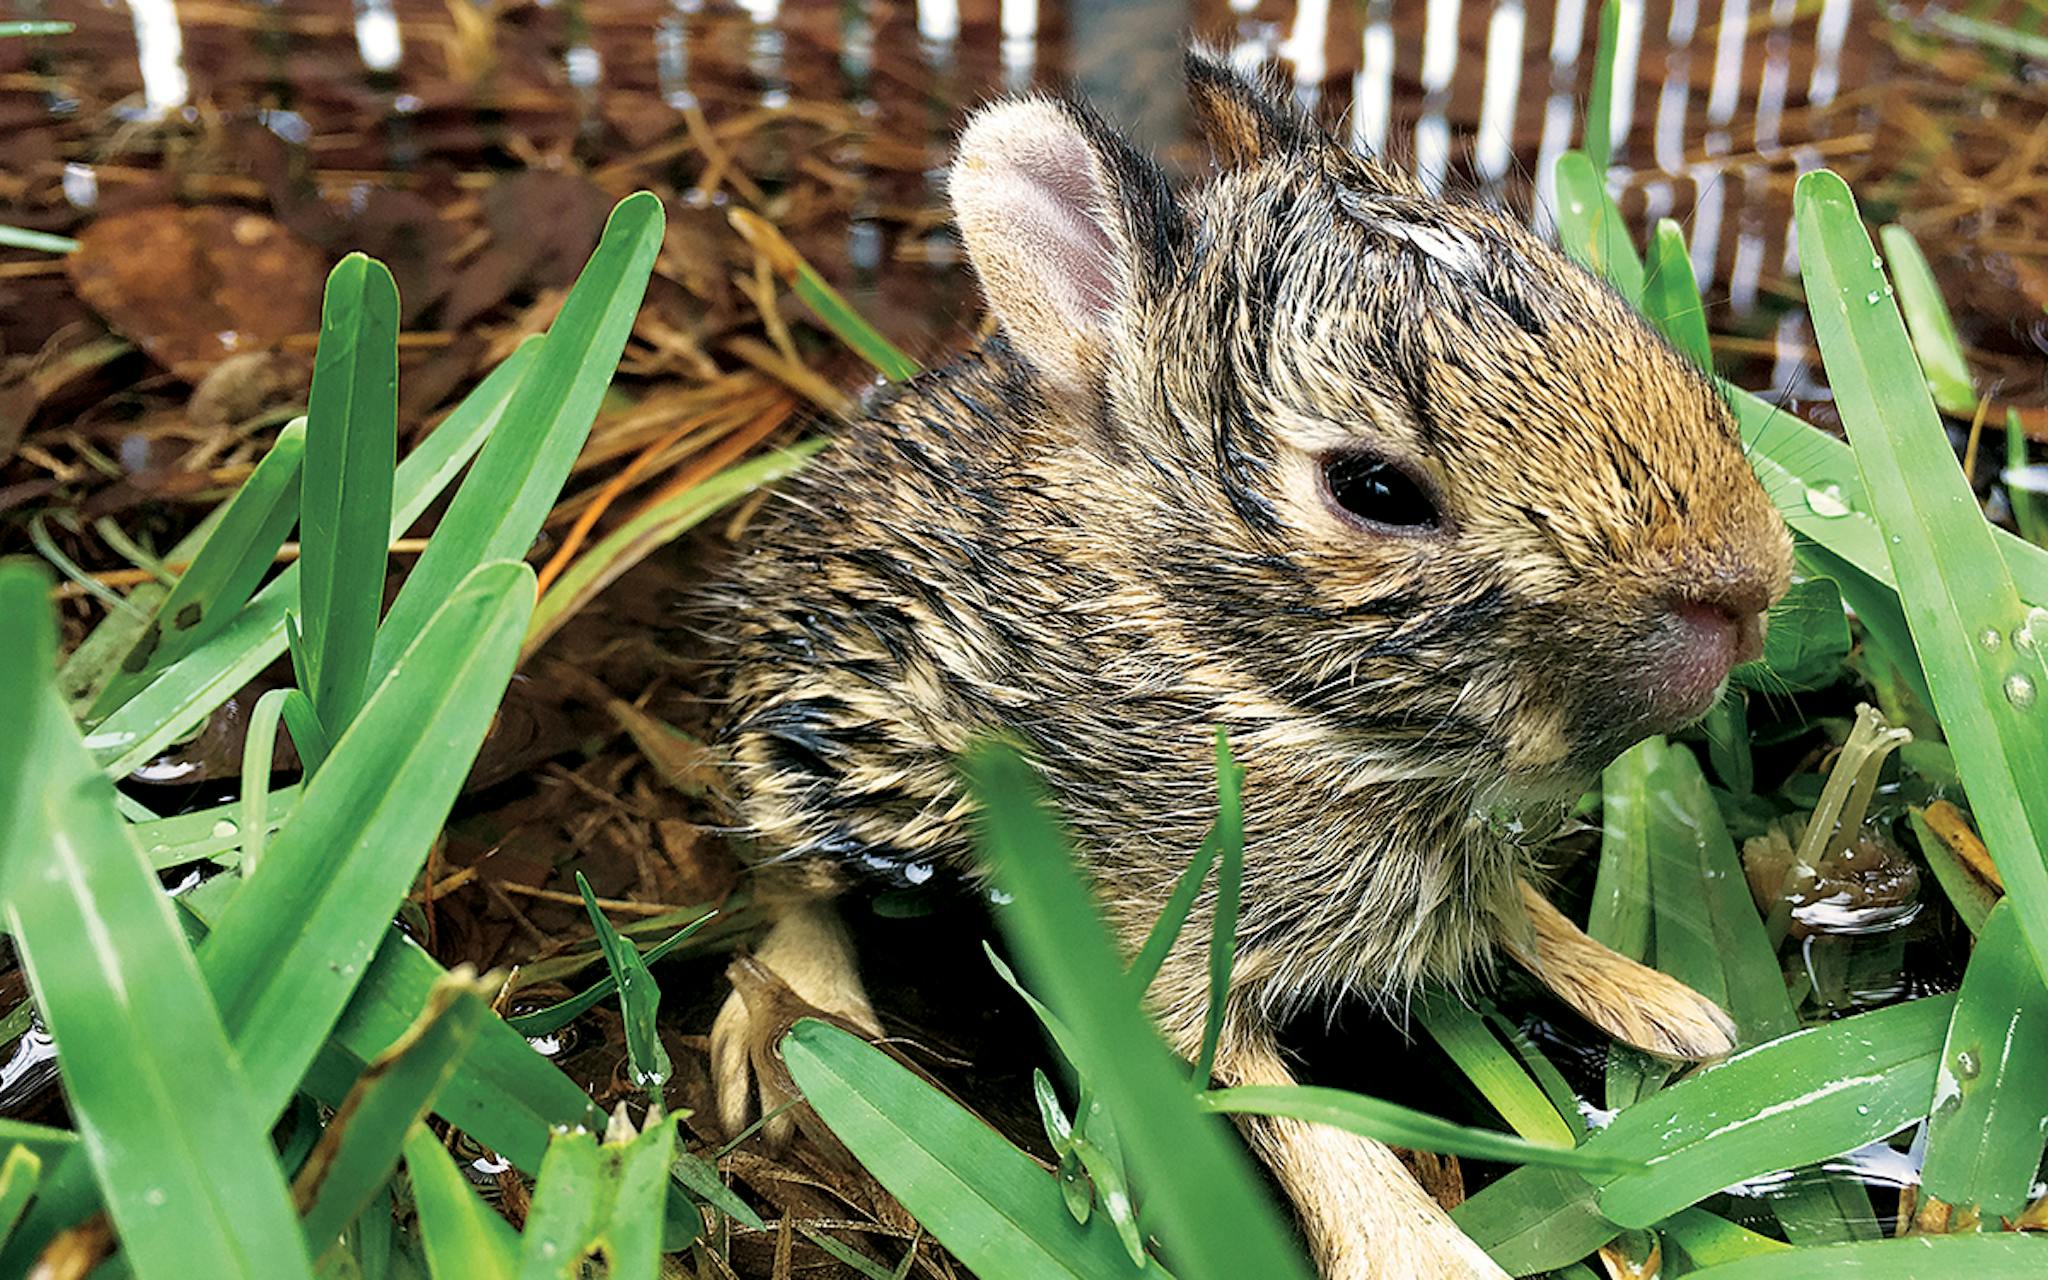 Baby bunny in the grass covered in water.